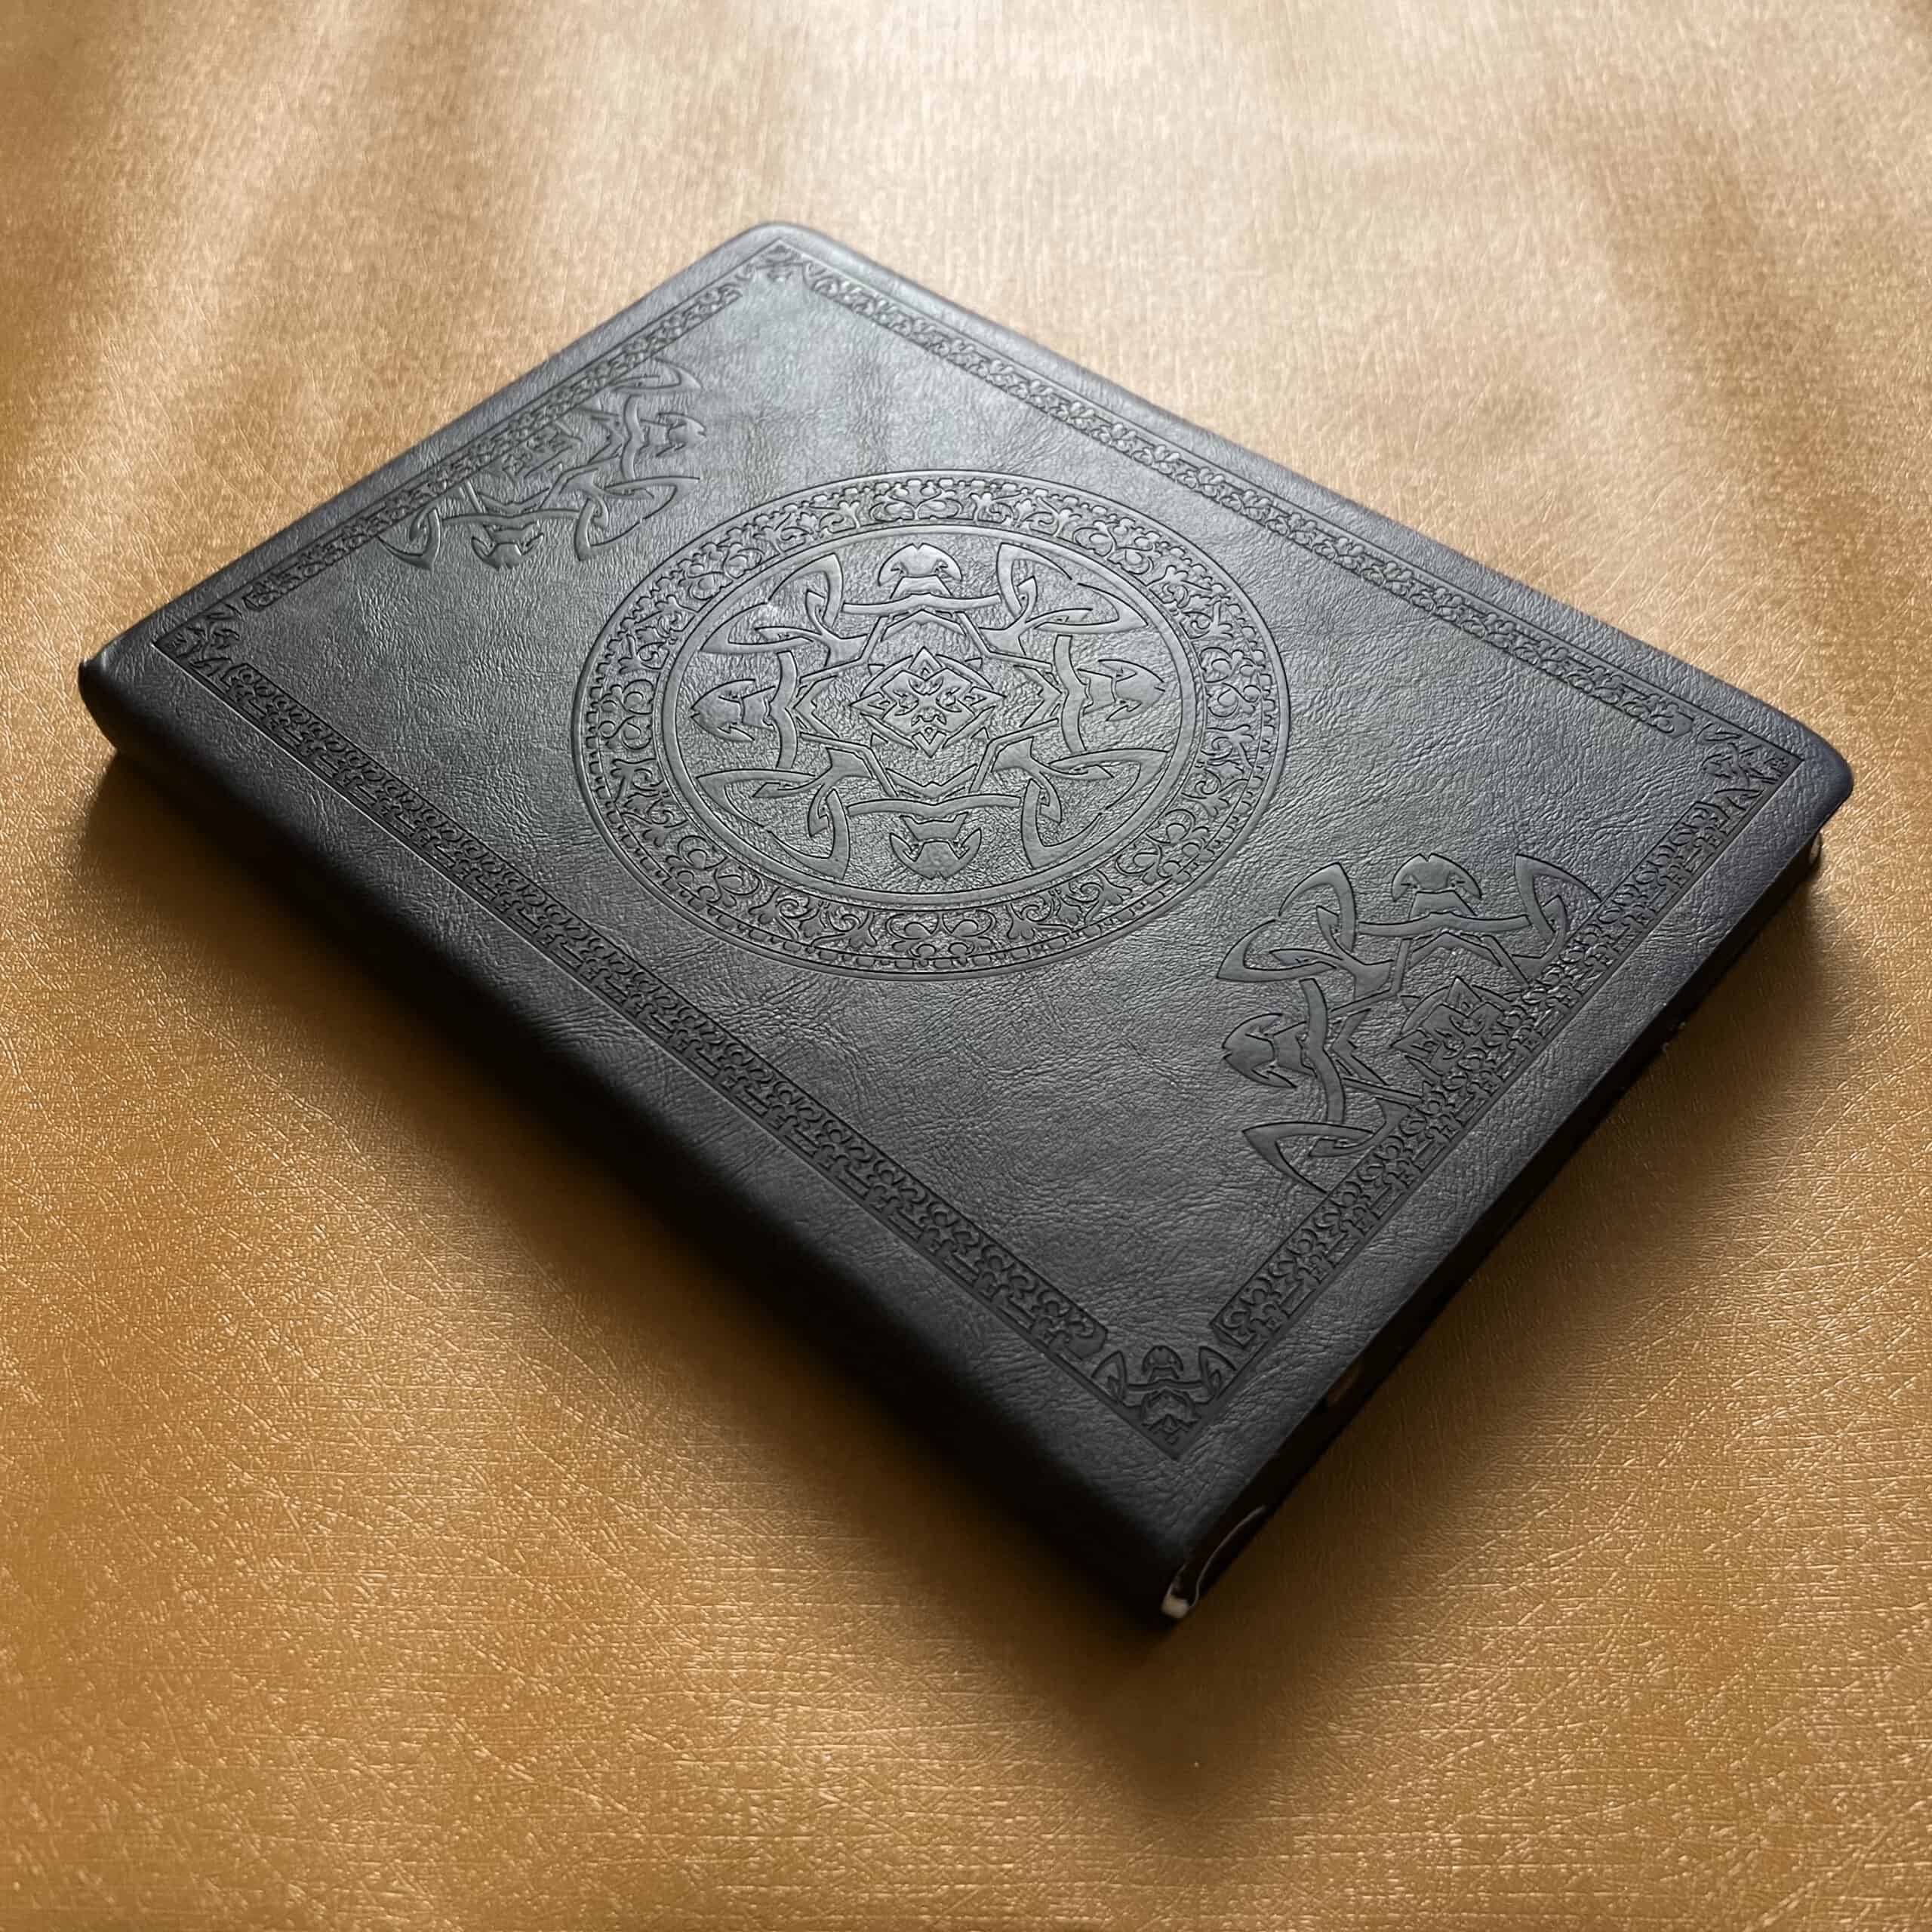 BOOK OF SHADOWS Leather Writing Journal